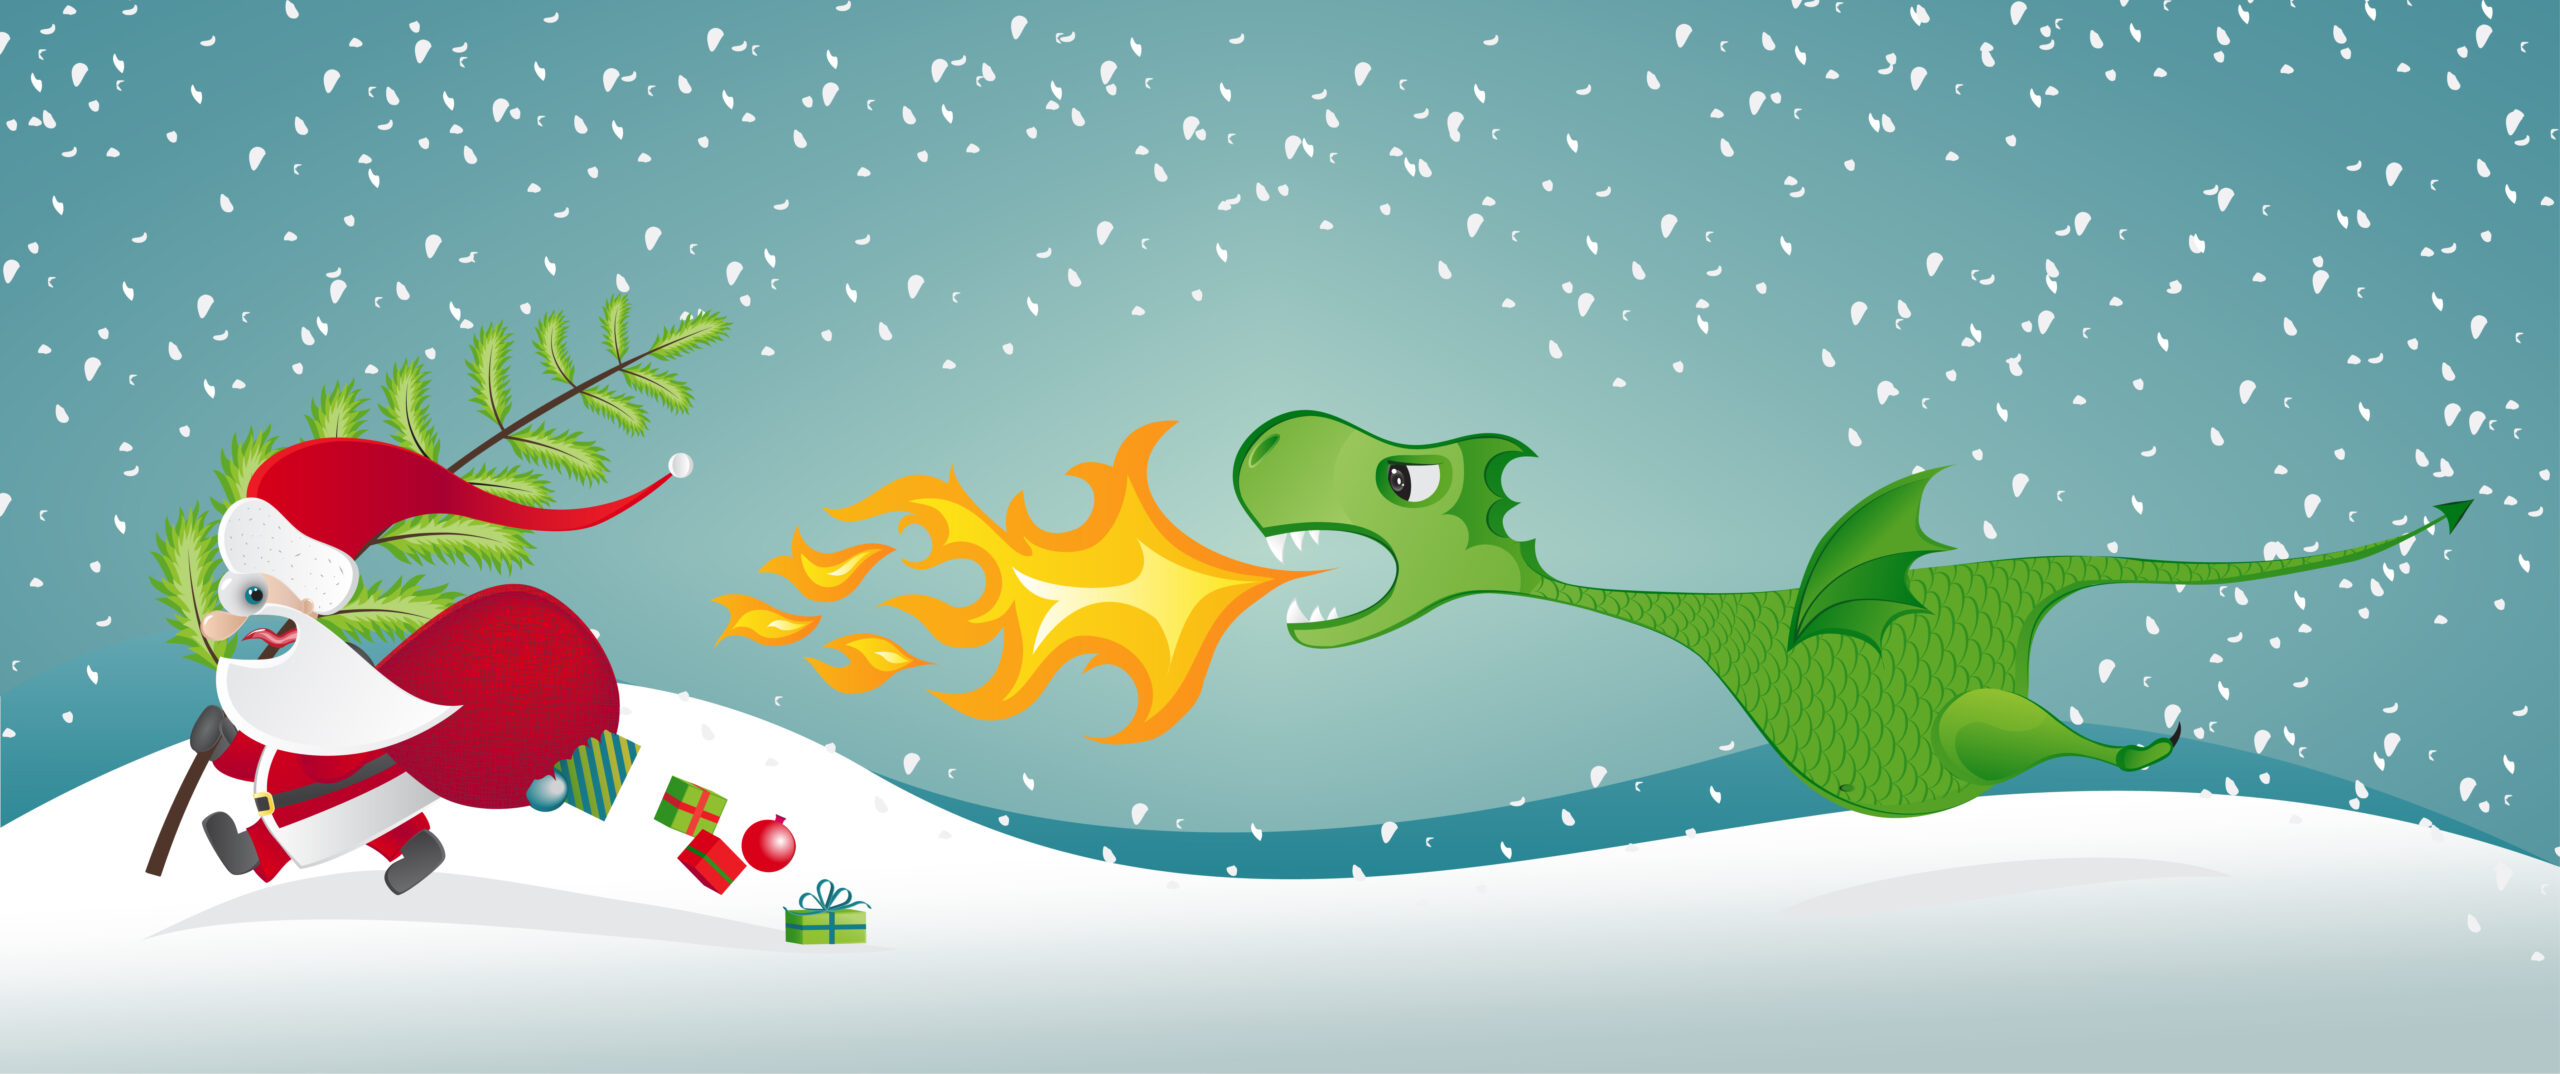 Twas the Night Before Christmas with Dragons